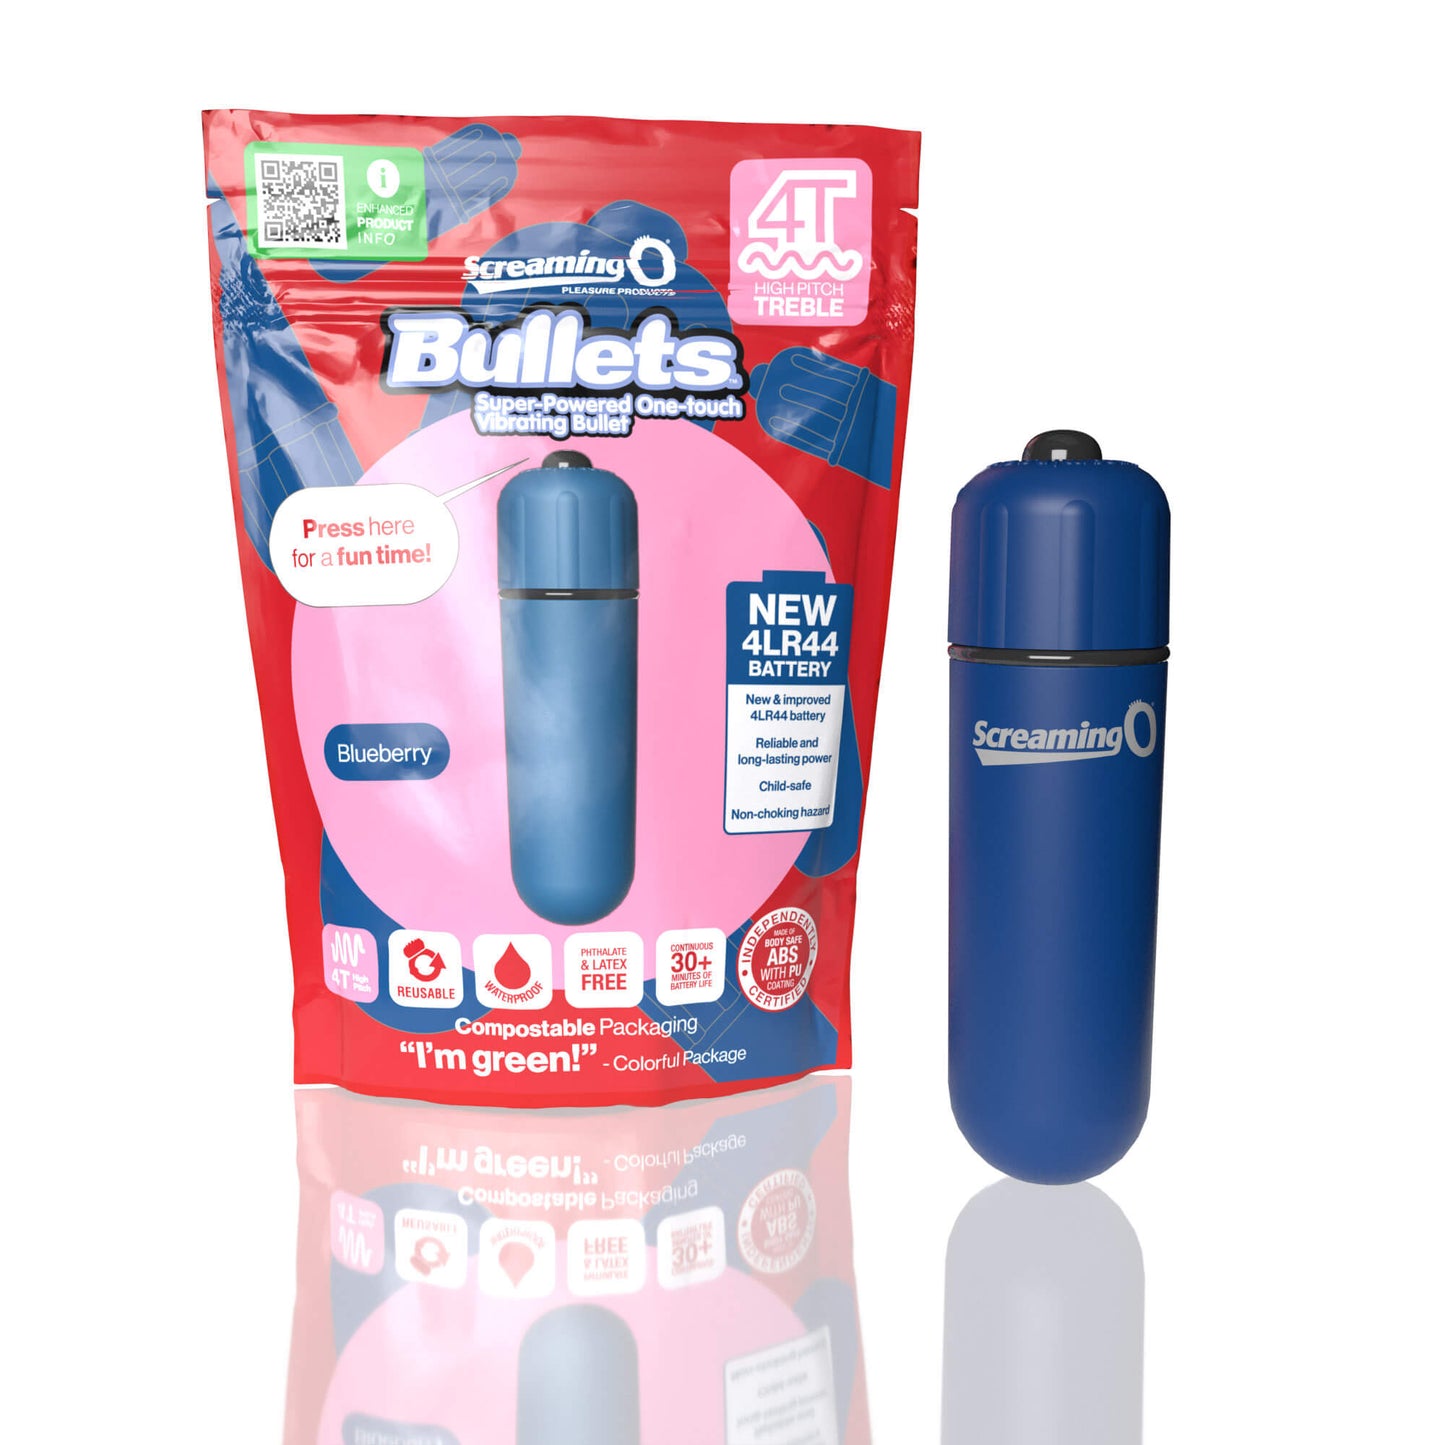 Screaming O 4T - Tickle & Tease Bullet - Assorted Colors